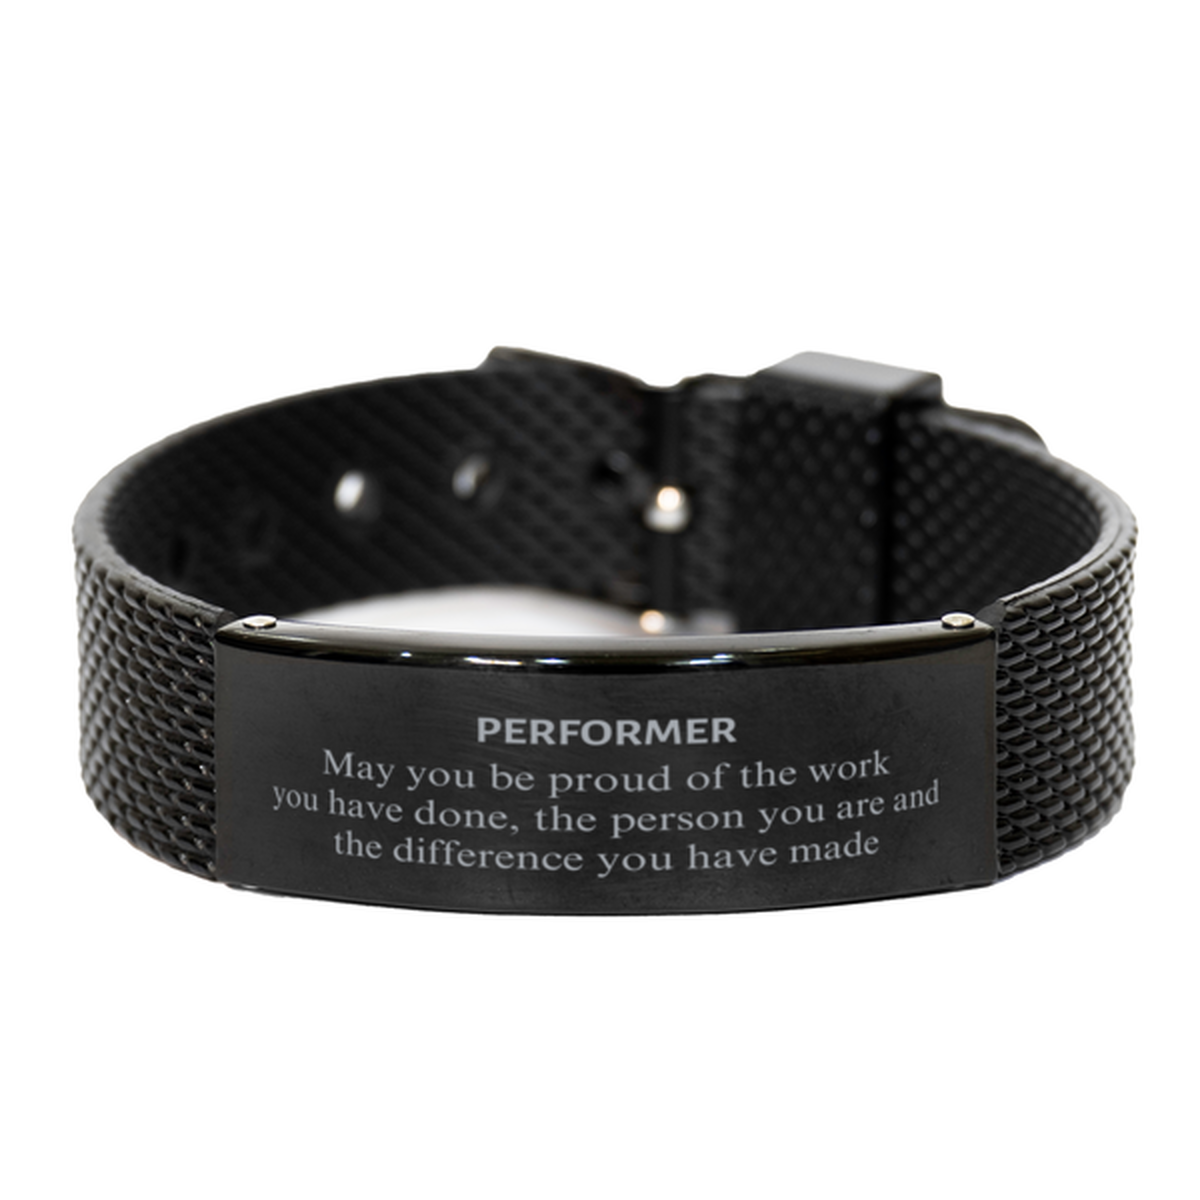 Performer May you be proud of the work you have done, Retirement Performer Black Shark Mesh Bracelet for Colleague Appreciation Gifts Amazing for Performer